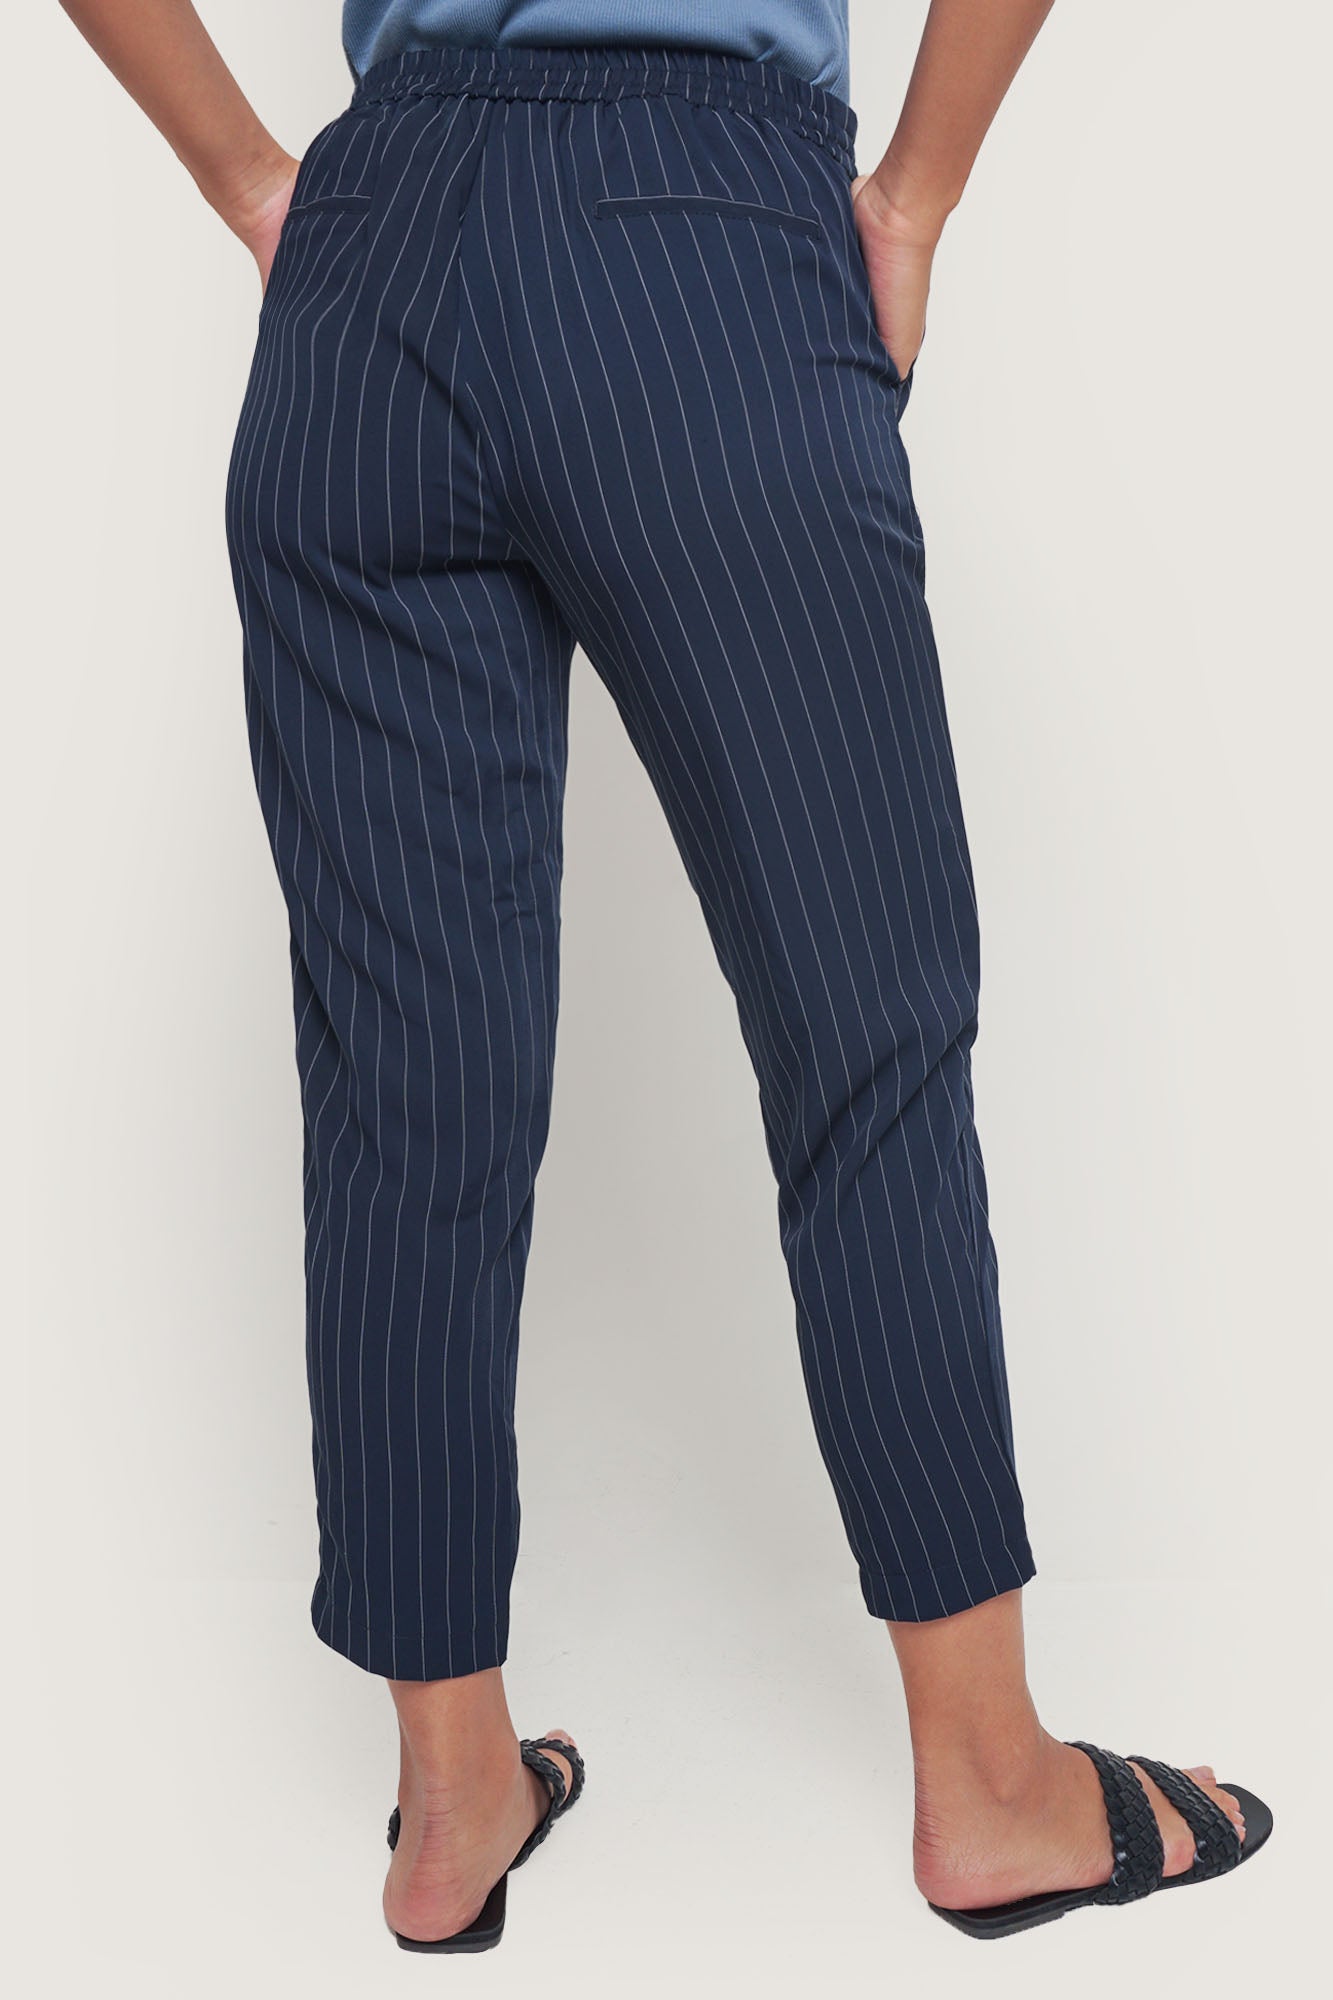 Closet Staples Ankle-Length Drawstring Pull Up Trousers